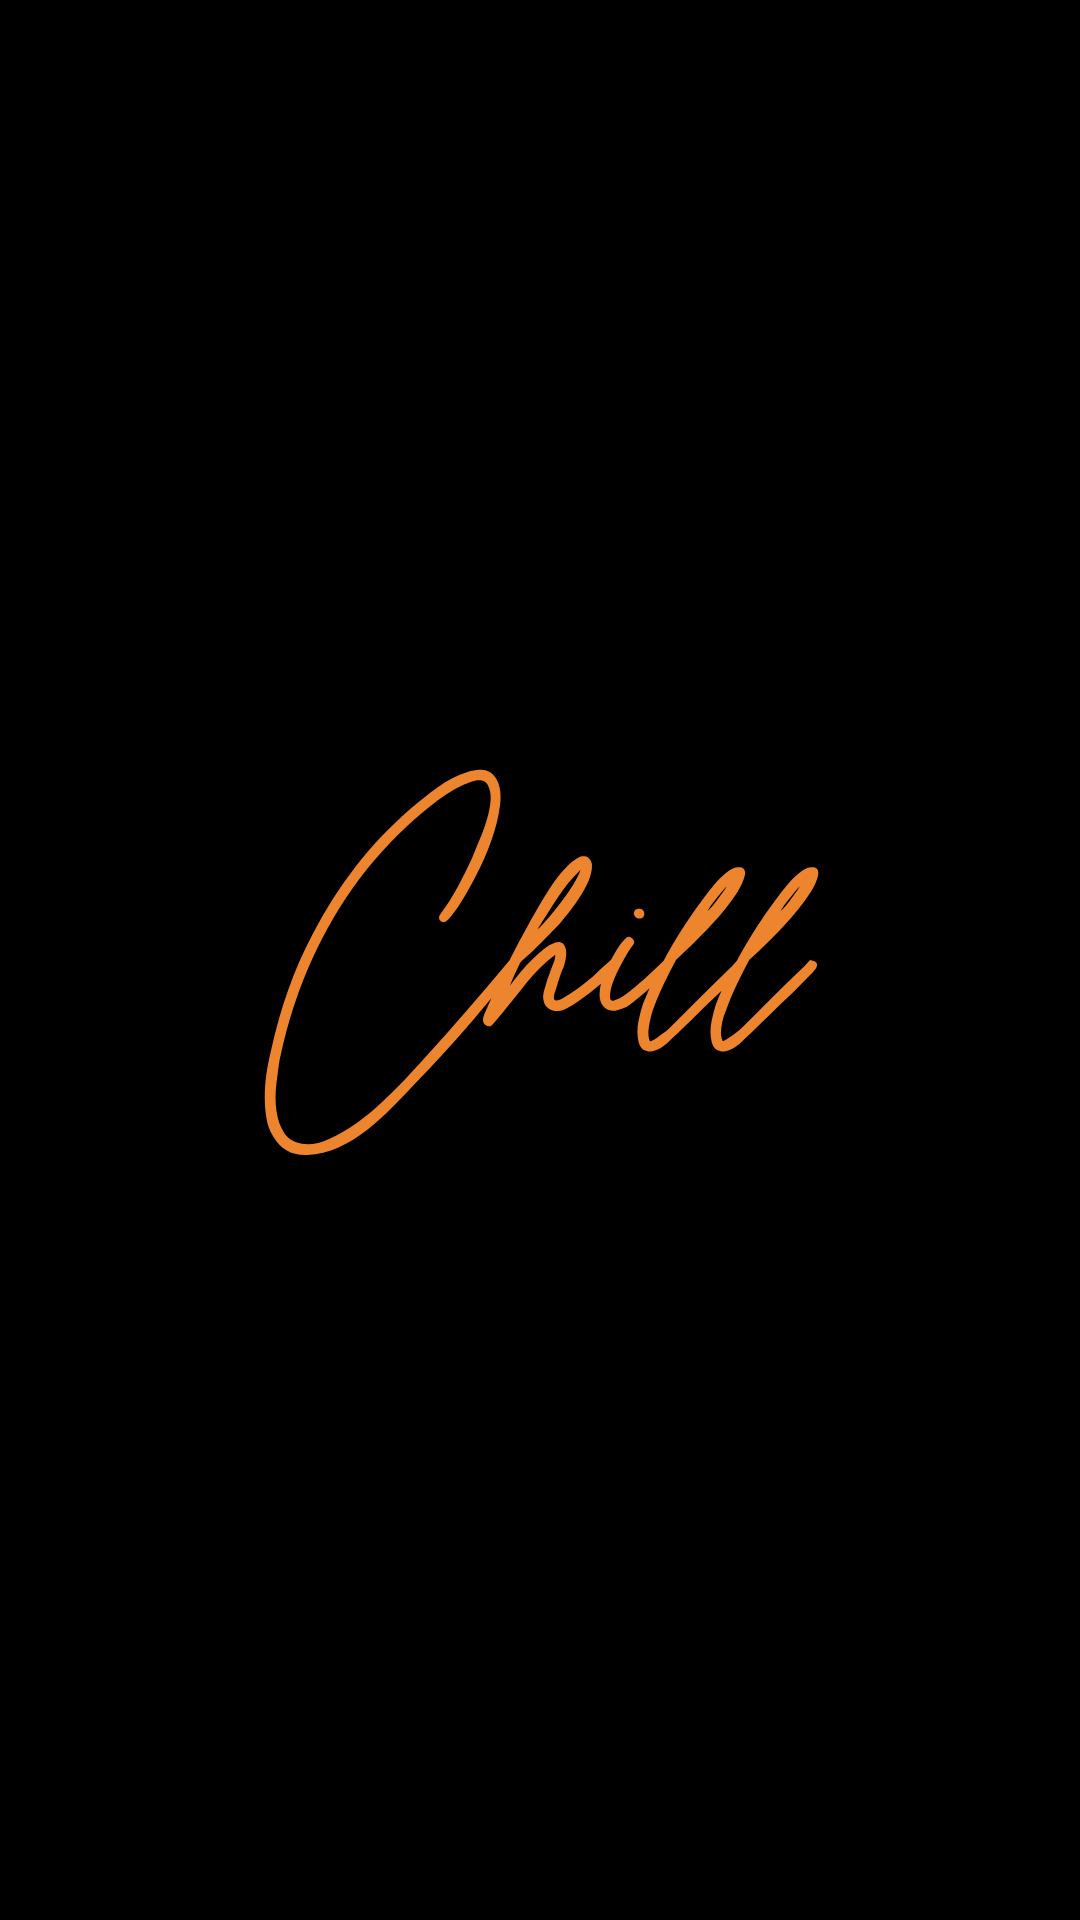 Chill Black Wallpapers - Top Free Chill Black Backgrounds - WallpaperAccess